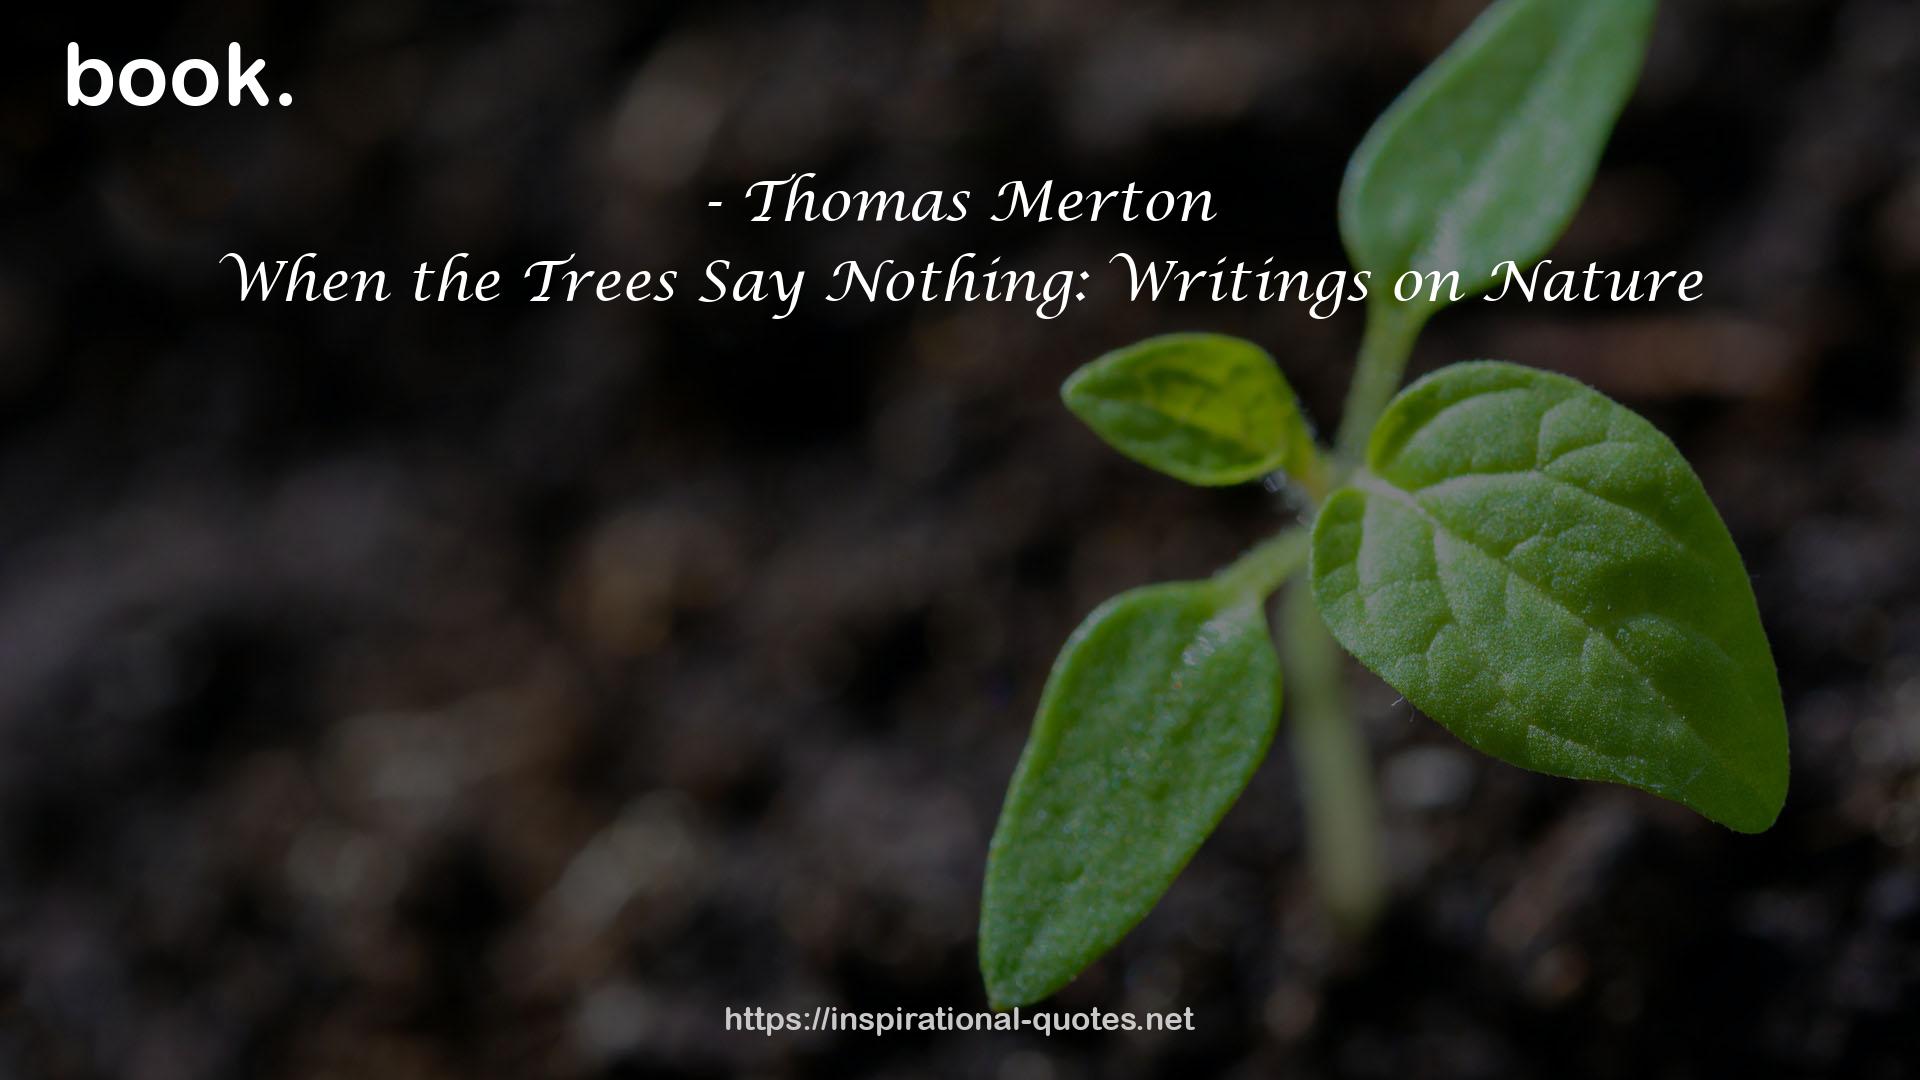 When the Trees Say Nothing: Writings on Nature QUOTES